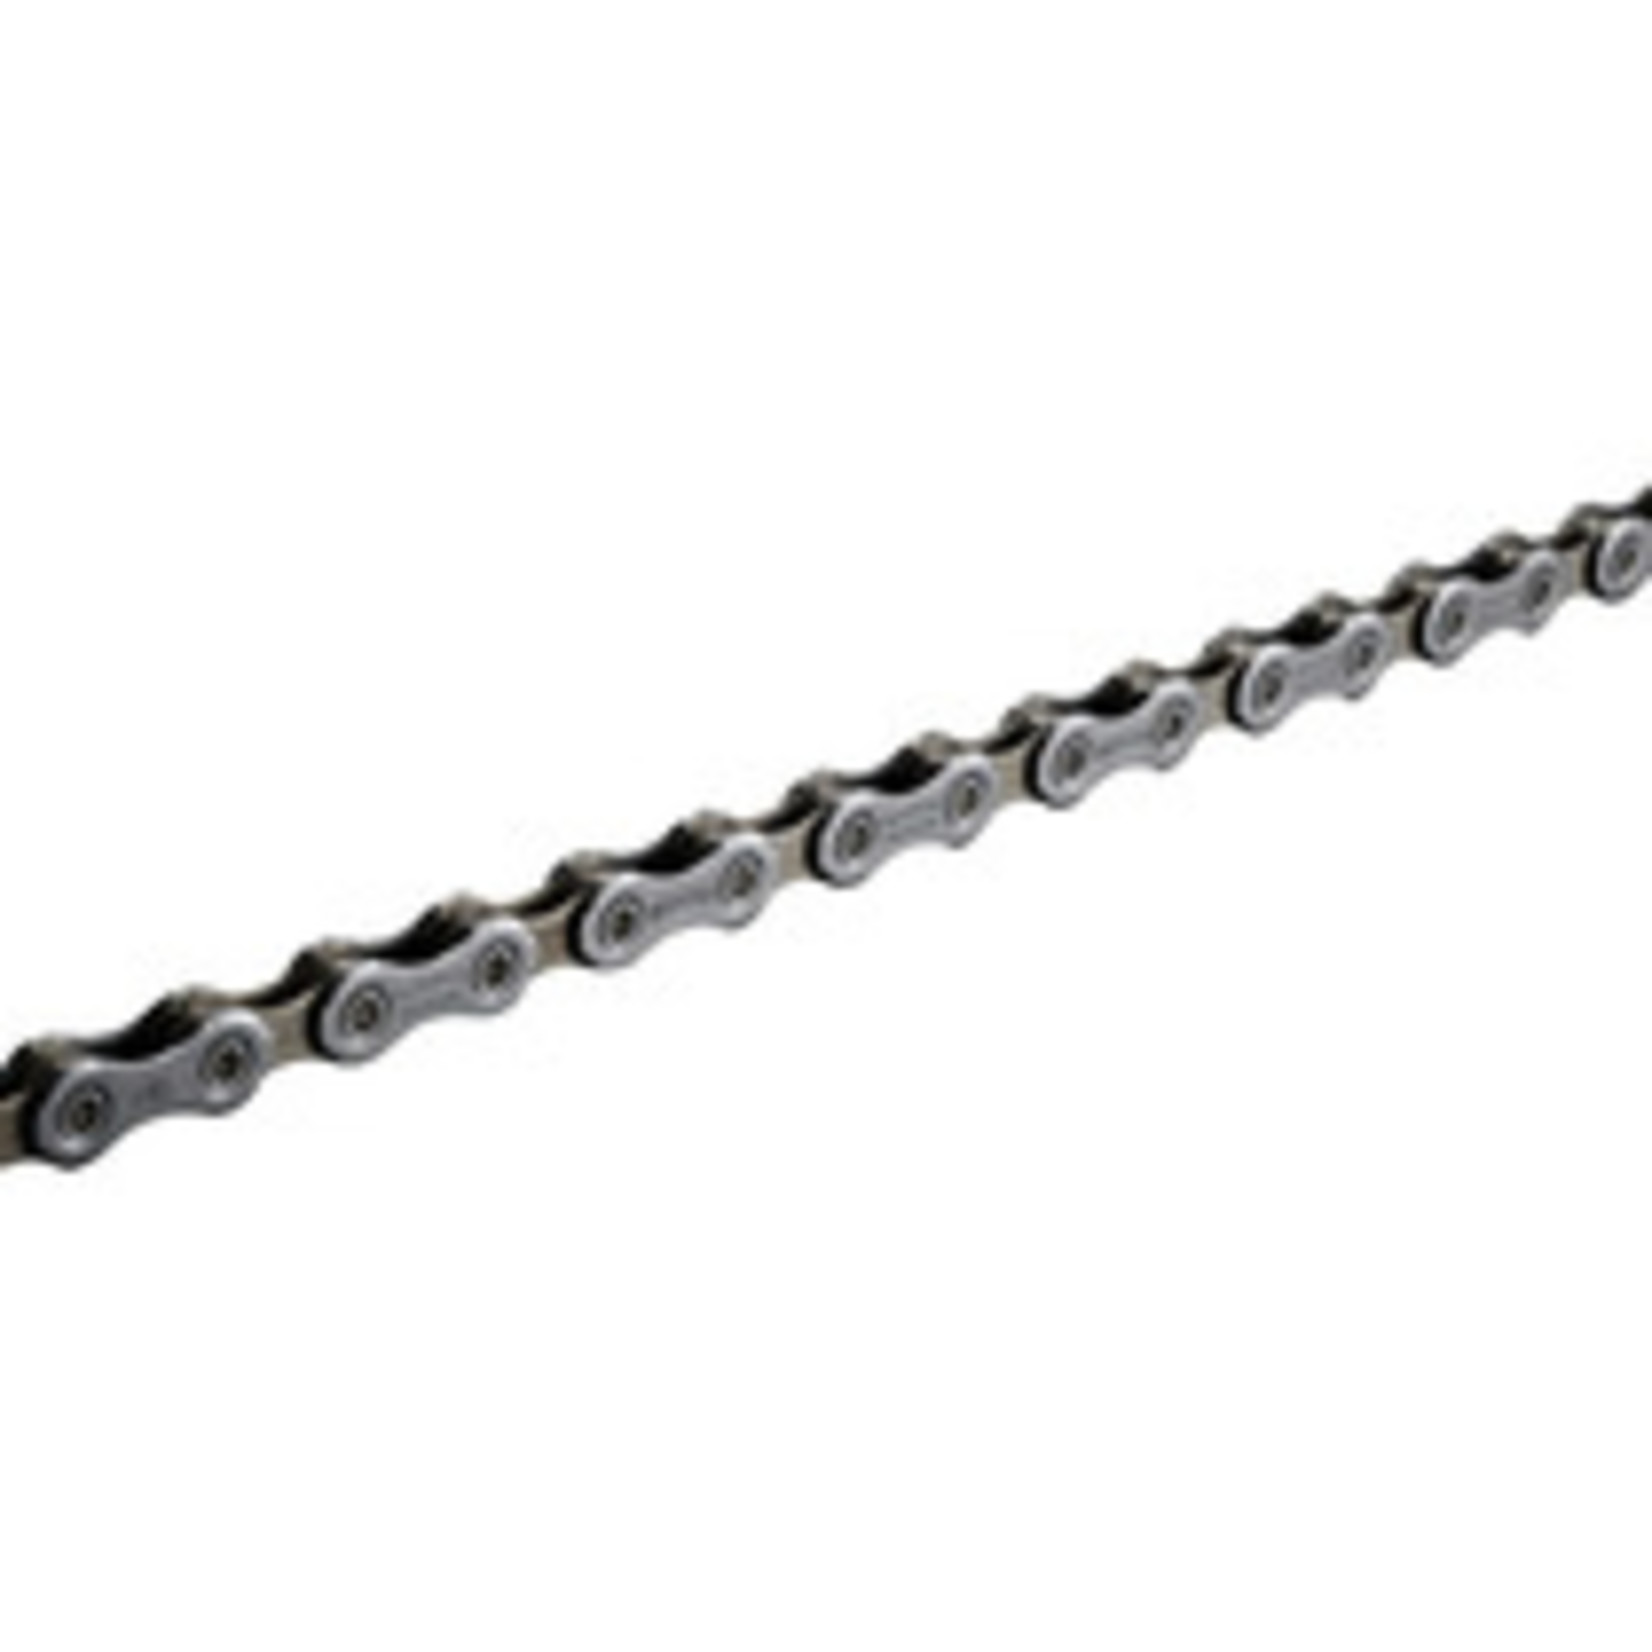 Shimano CHAIN, CN-HG601-11, FOR 11-SPEED (ROAD/MTB/E-BIKE COMPATIBLE), 116 LINKS (W/QUICK LINK, SM-CN900-11)